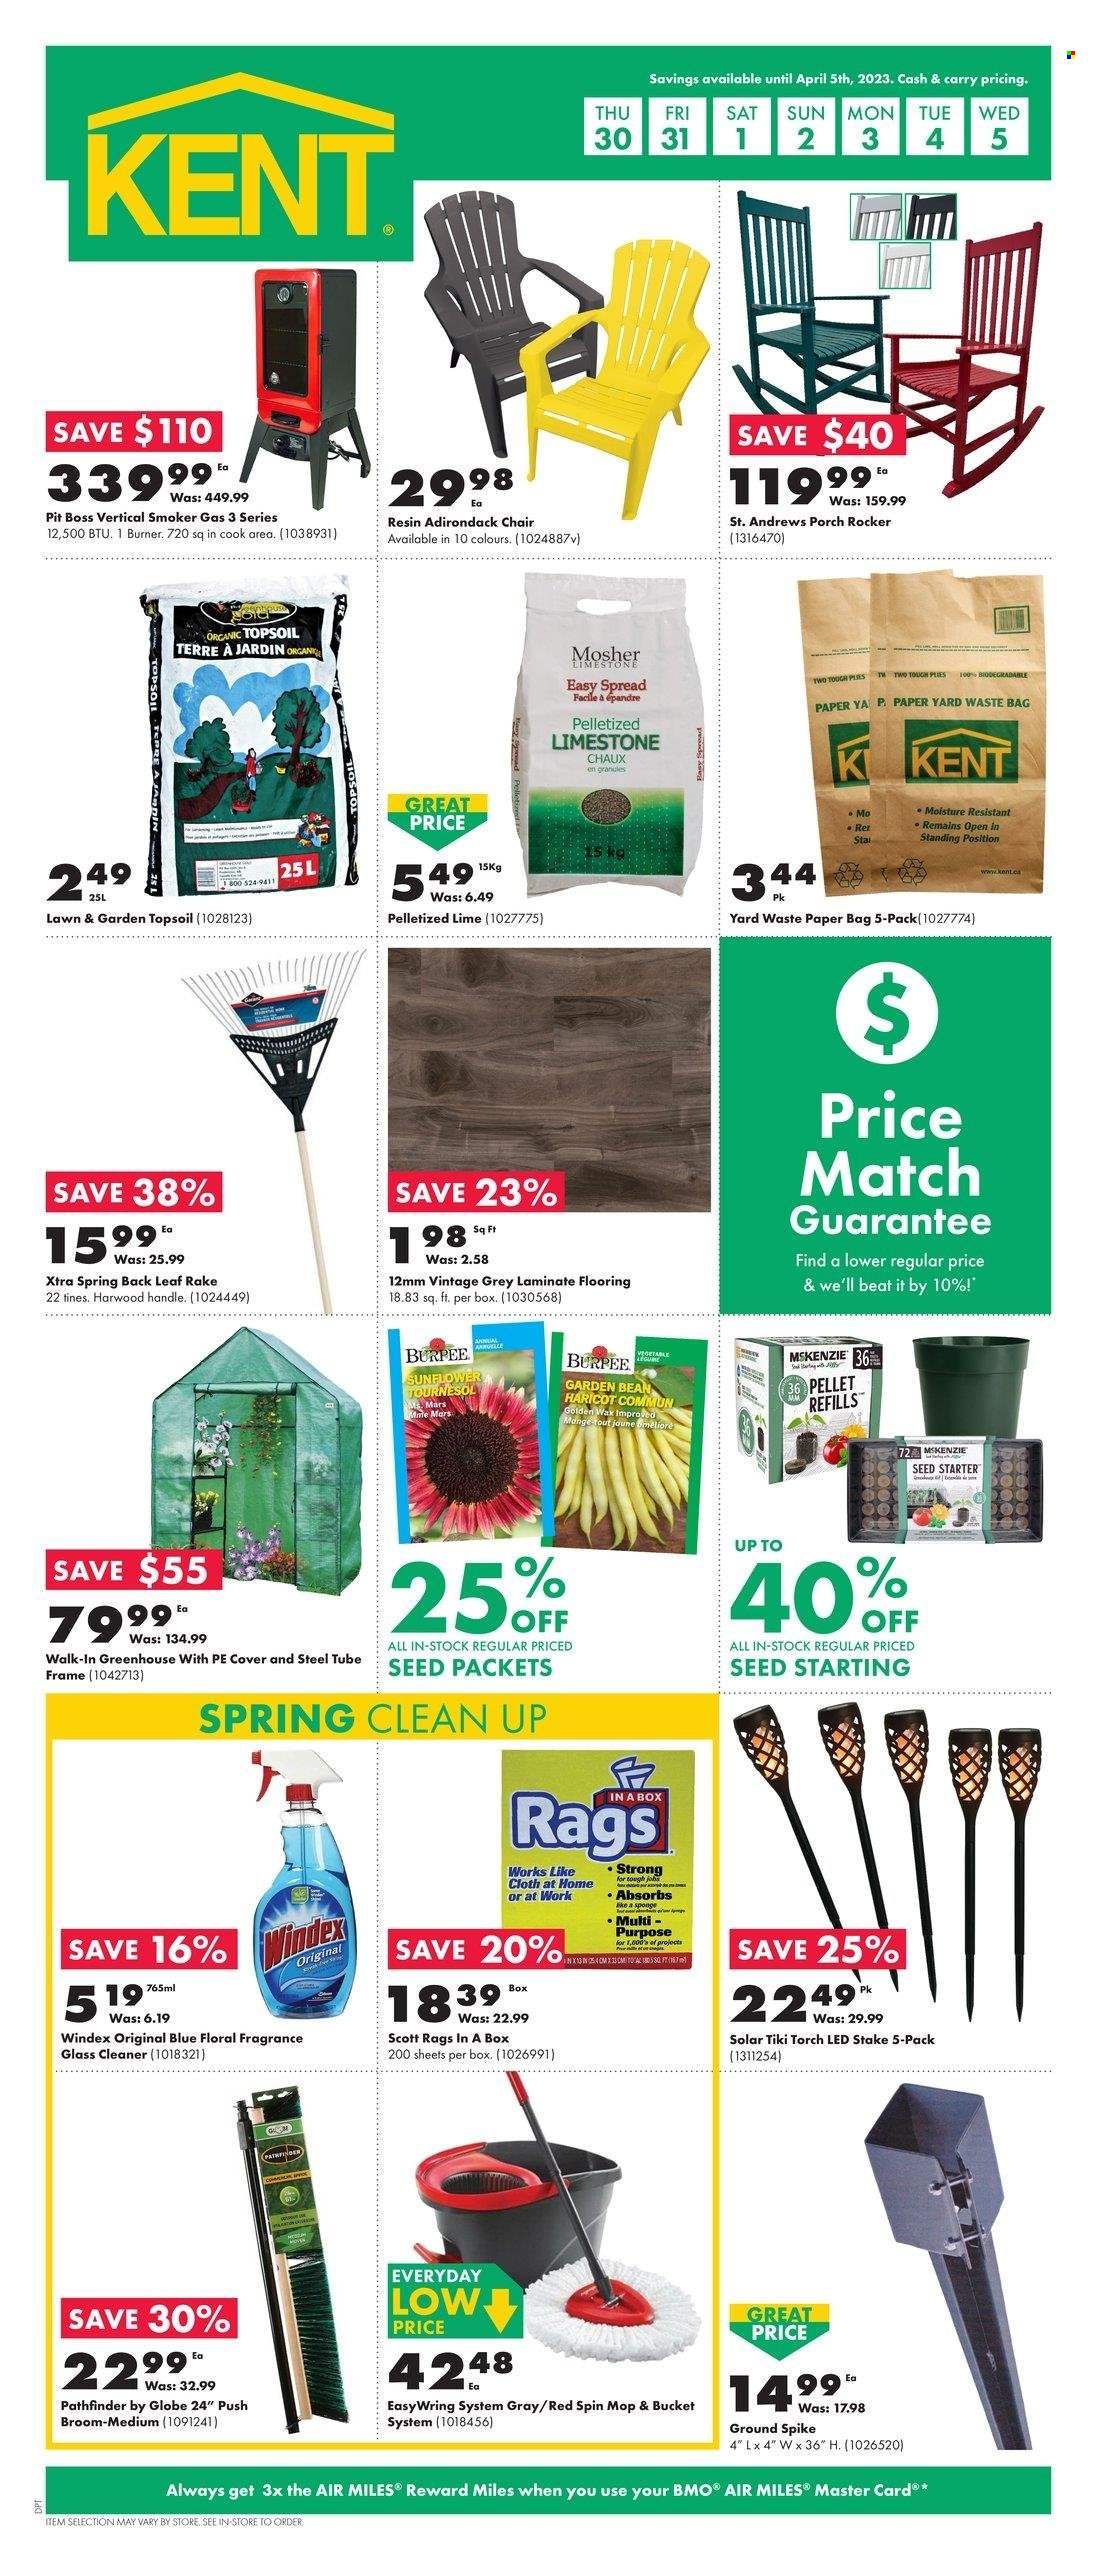 thumbnail - Kent Flyer - March 30, 2023 - April 05, 2023 - Sales products - Mars, tea, Windex, cleaner, glass cleaner, waste bag, spin mop, mop, broom, rags, paper bag, chair, flooring, laminate floor, greenhouse, smoker, plant seeds, sunflower, pelletized lime, starter, Scott, torch, pellet gun. Page 1.